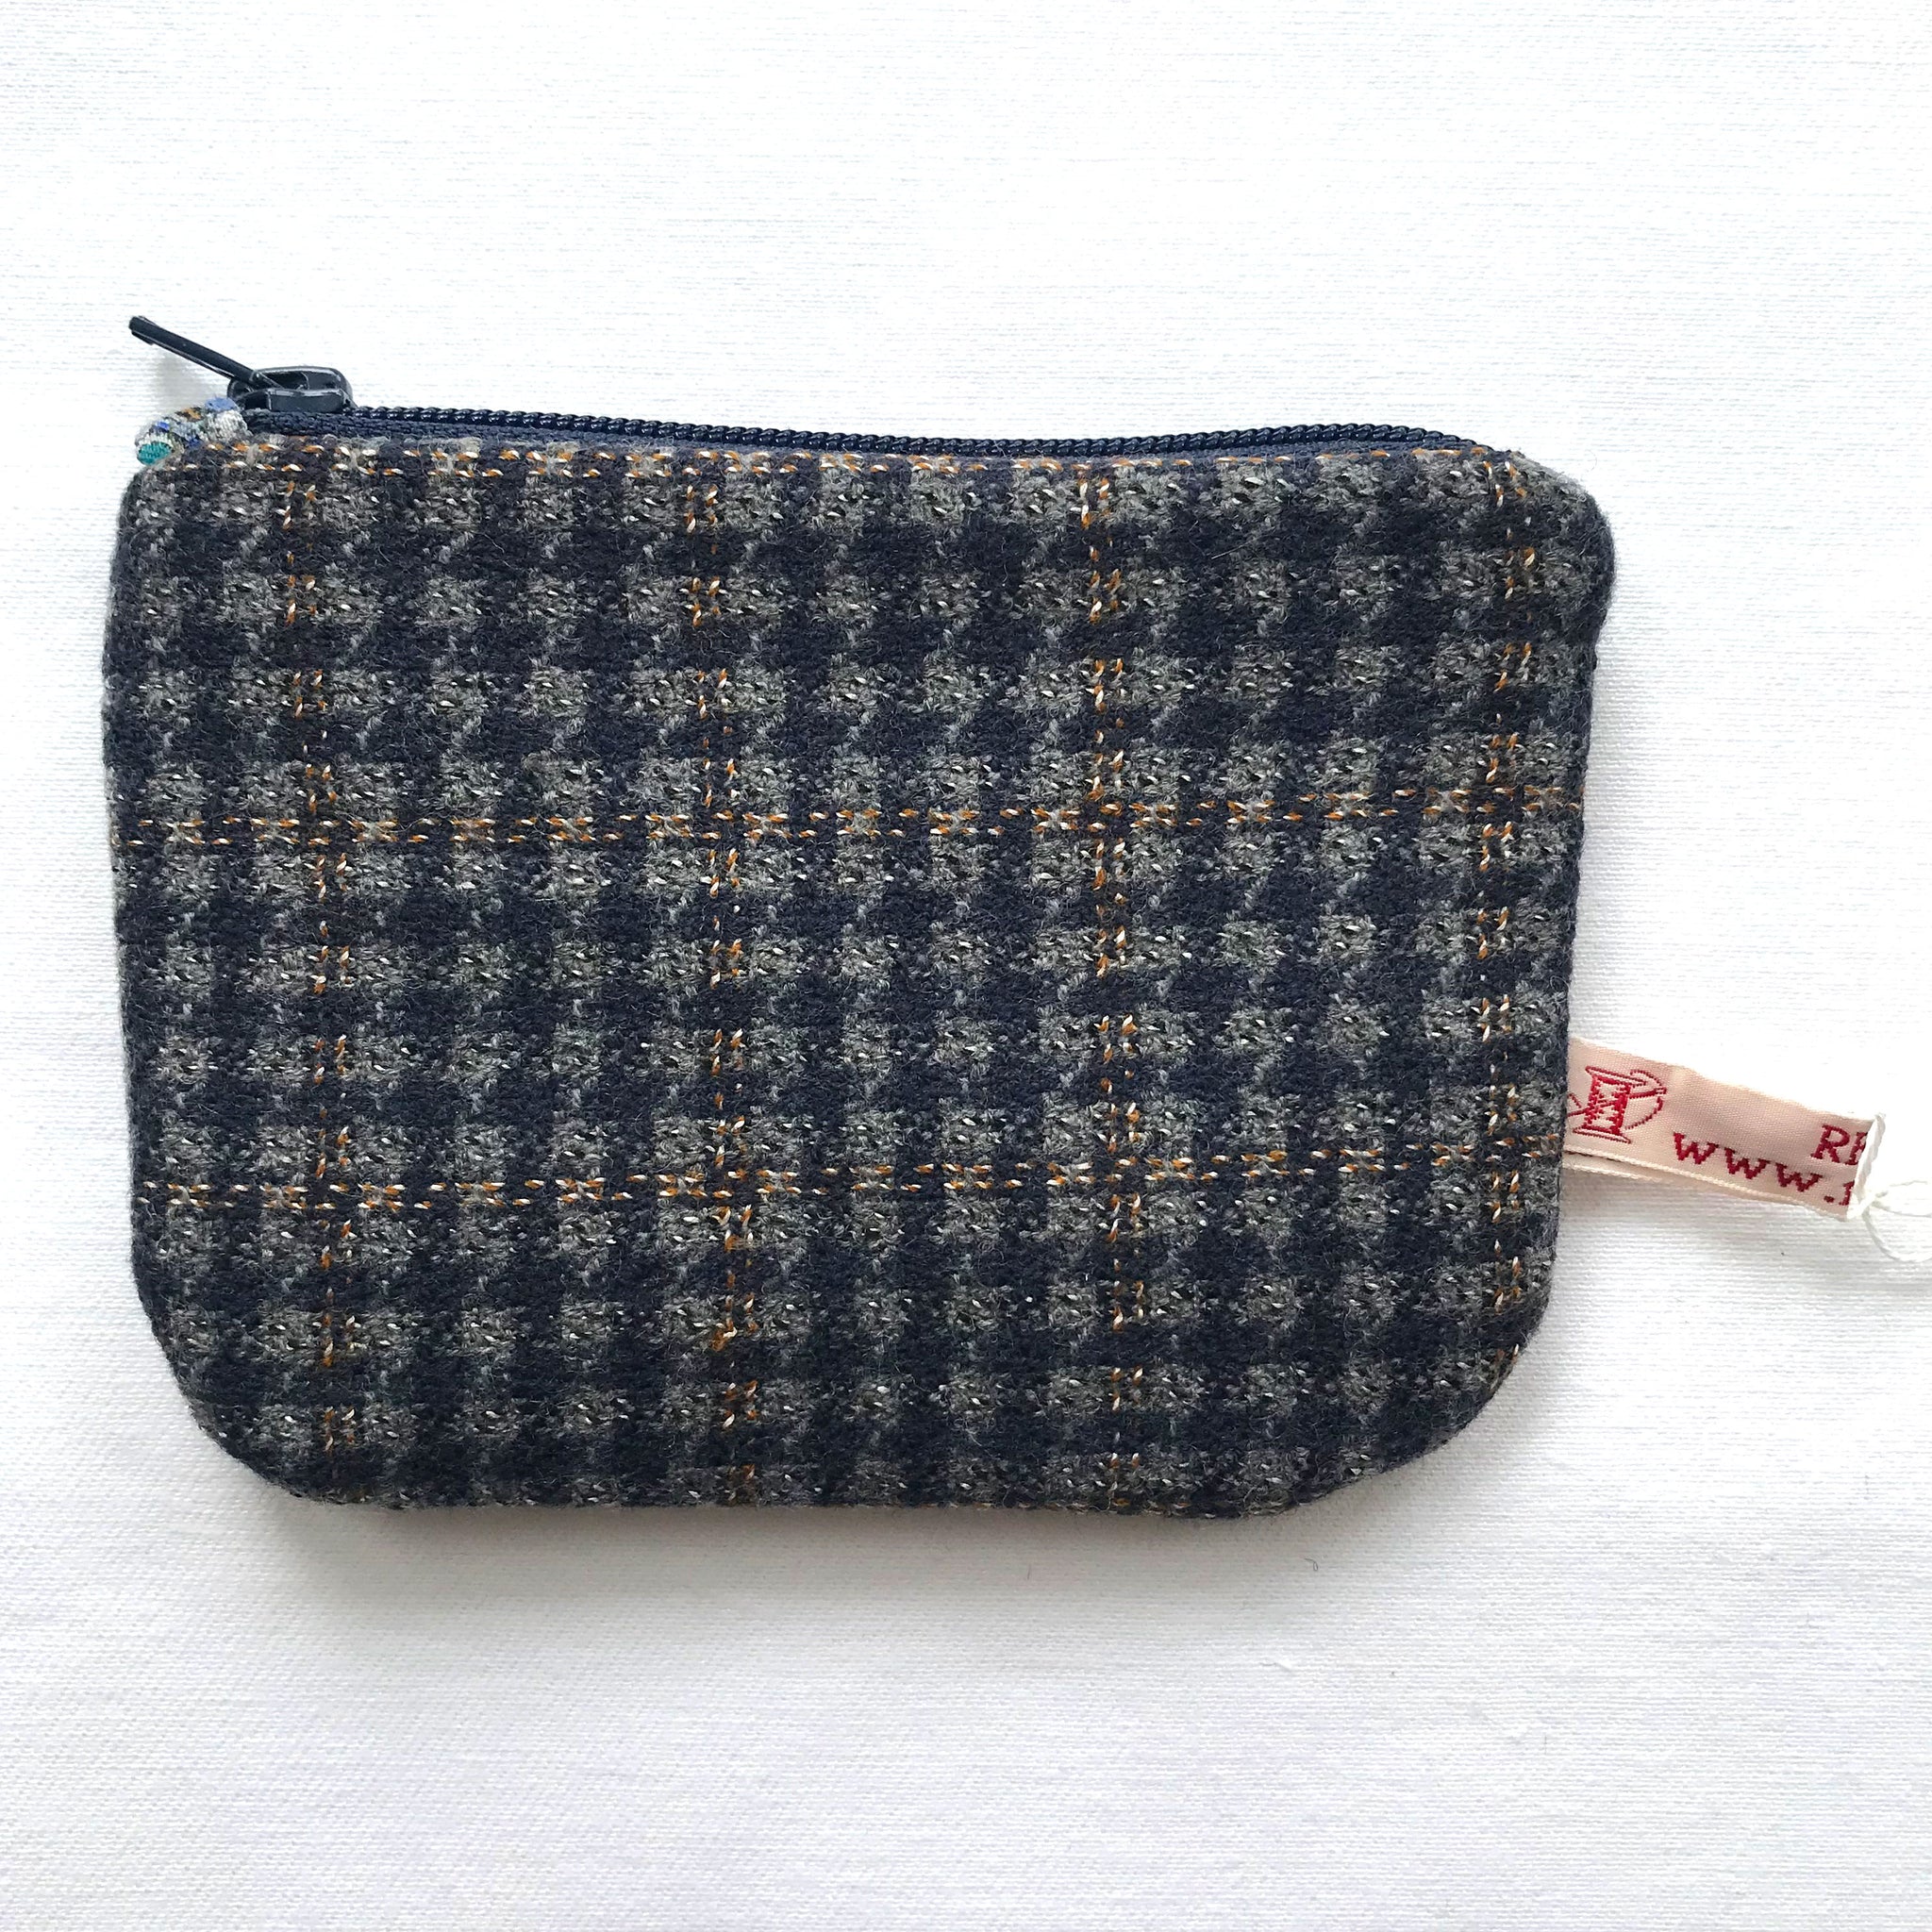 Close up of purse with blue and grey tweed. ReTweed label is showing.